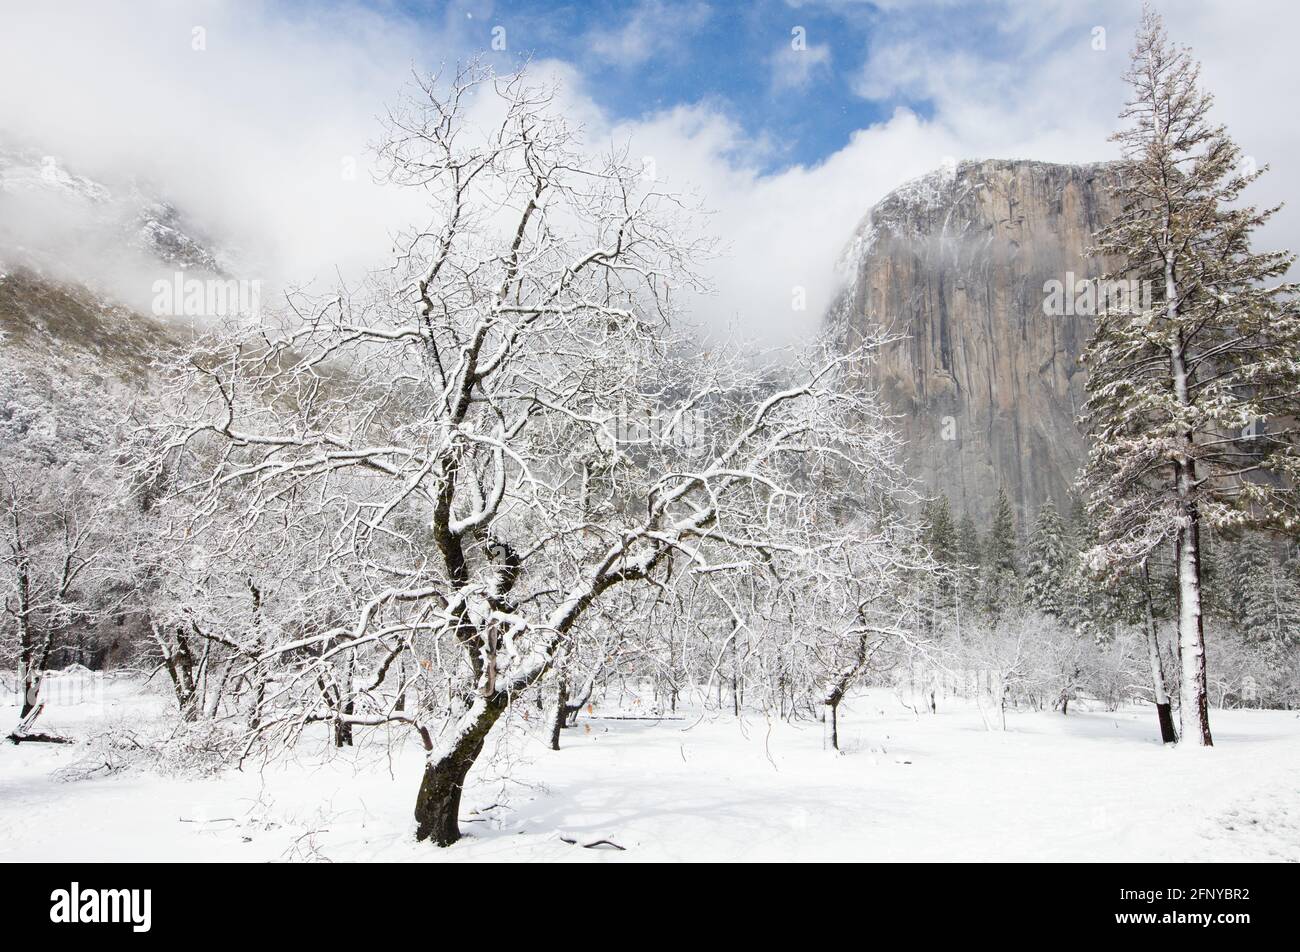 Yosemite Valley in the winter, with fresh fallen snow and the iconic El Capitan looming over. Stock Photo